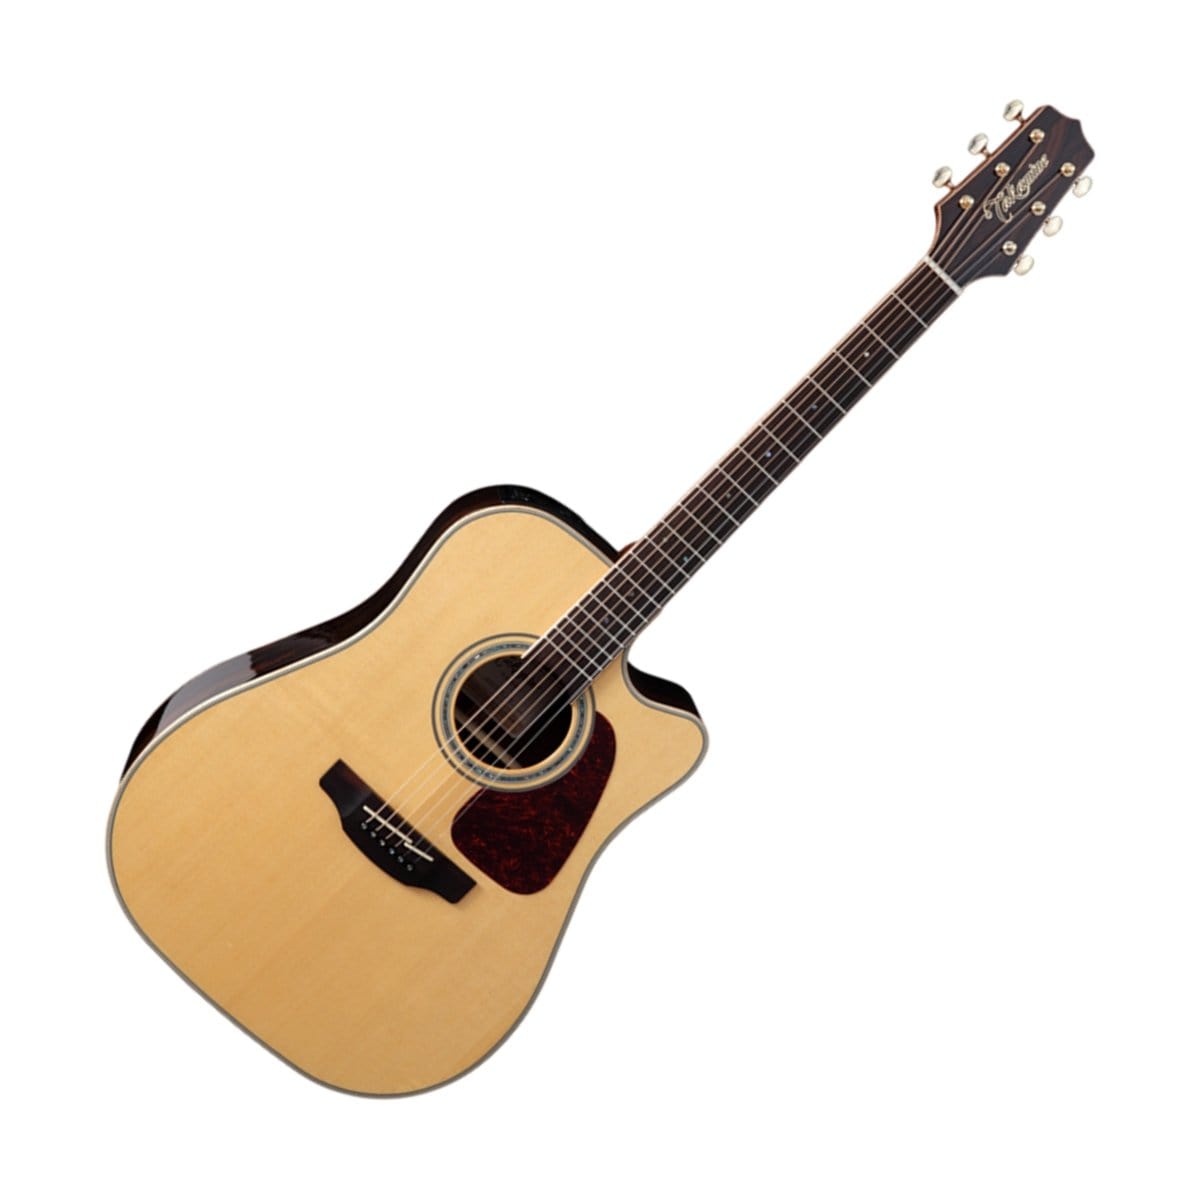 Takamine Guitar Takamine Dreadnought Acoustic/Electric Guitar Solid Top GD90CE-ZC - Byron Music